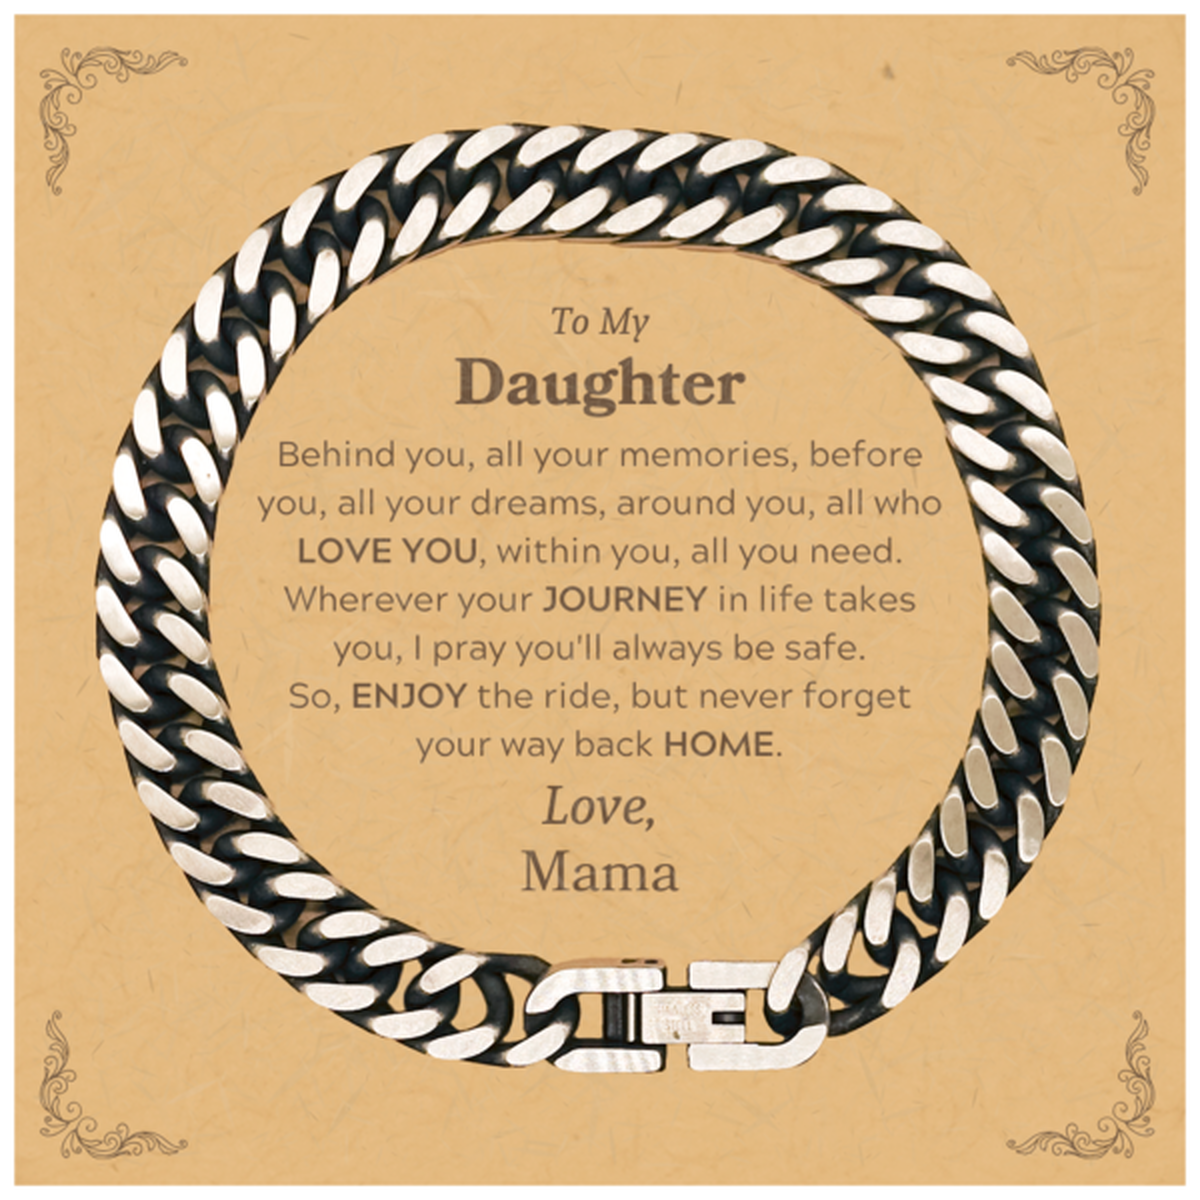 To My Daughter Graduation Gifts from Mama, Daughter Cuban Link Chain Bracelet Christmas Birthday Gifts for Daughter Behind you, all your memories, before you, all your dreams. Love, Mama